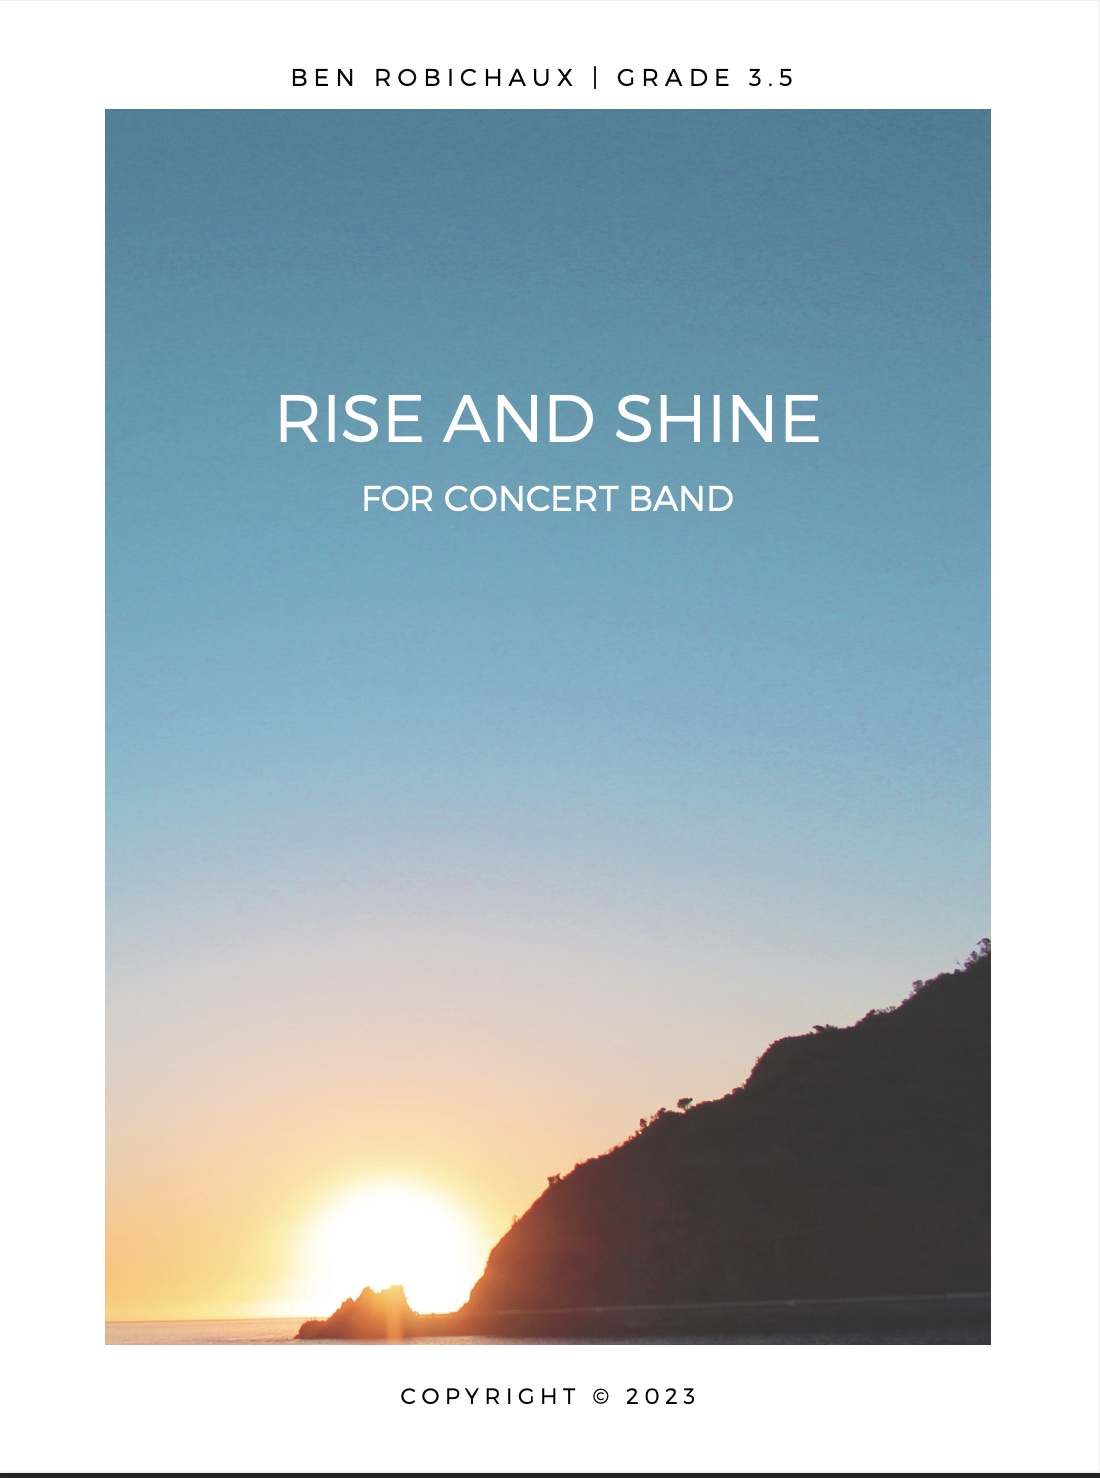 Rise And Shine by Ben Robichaux